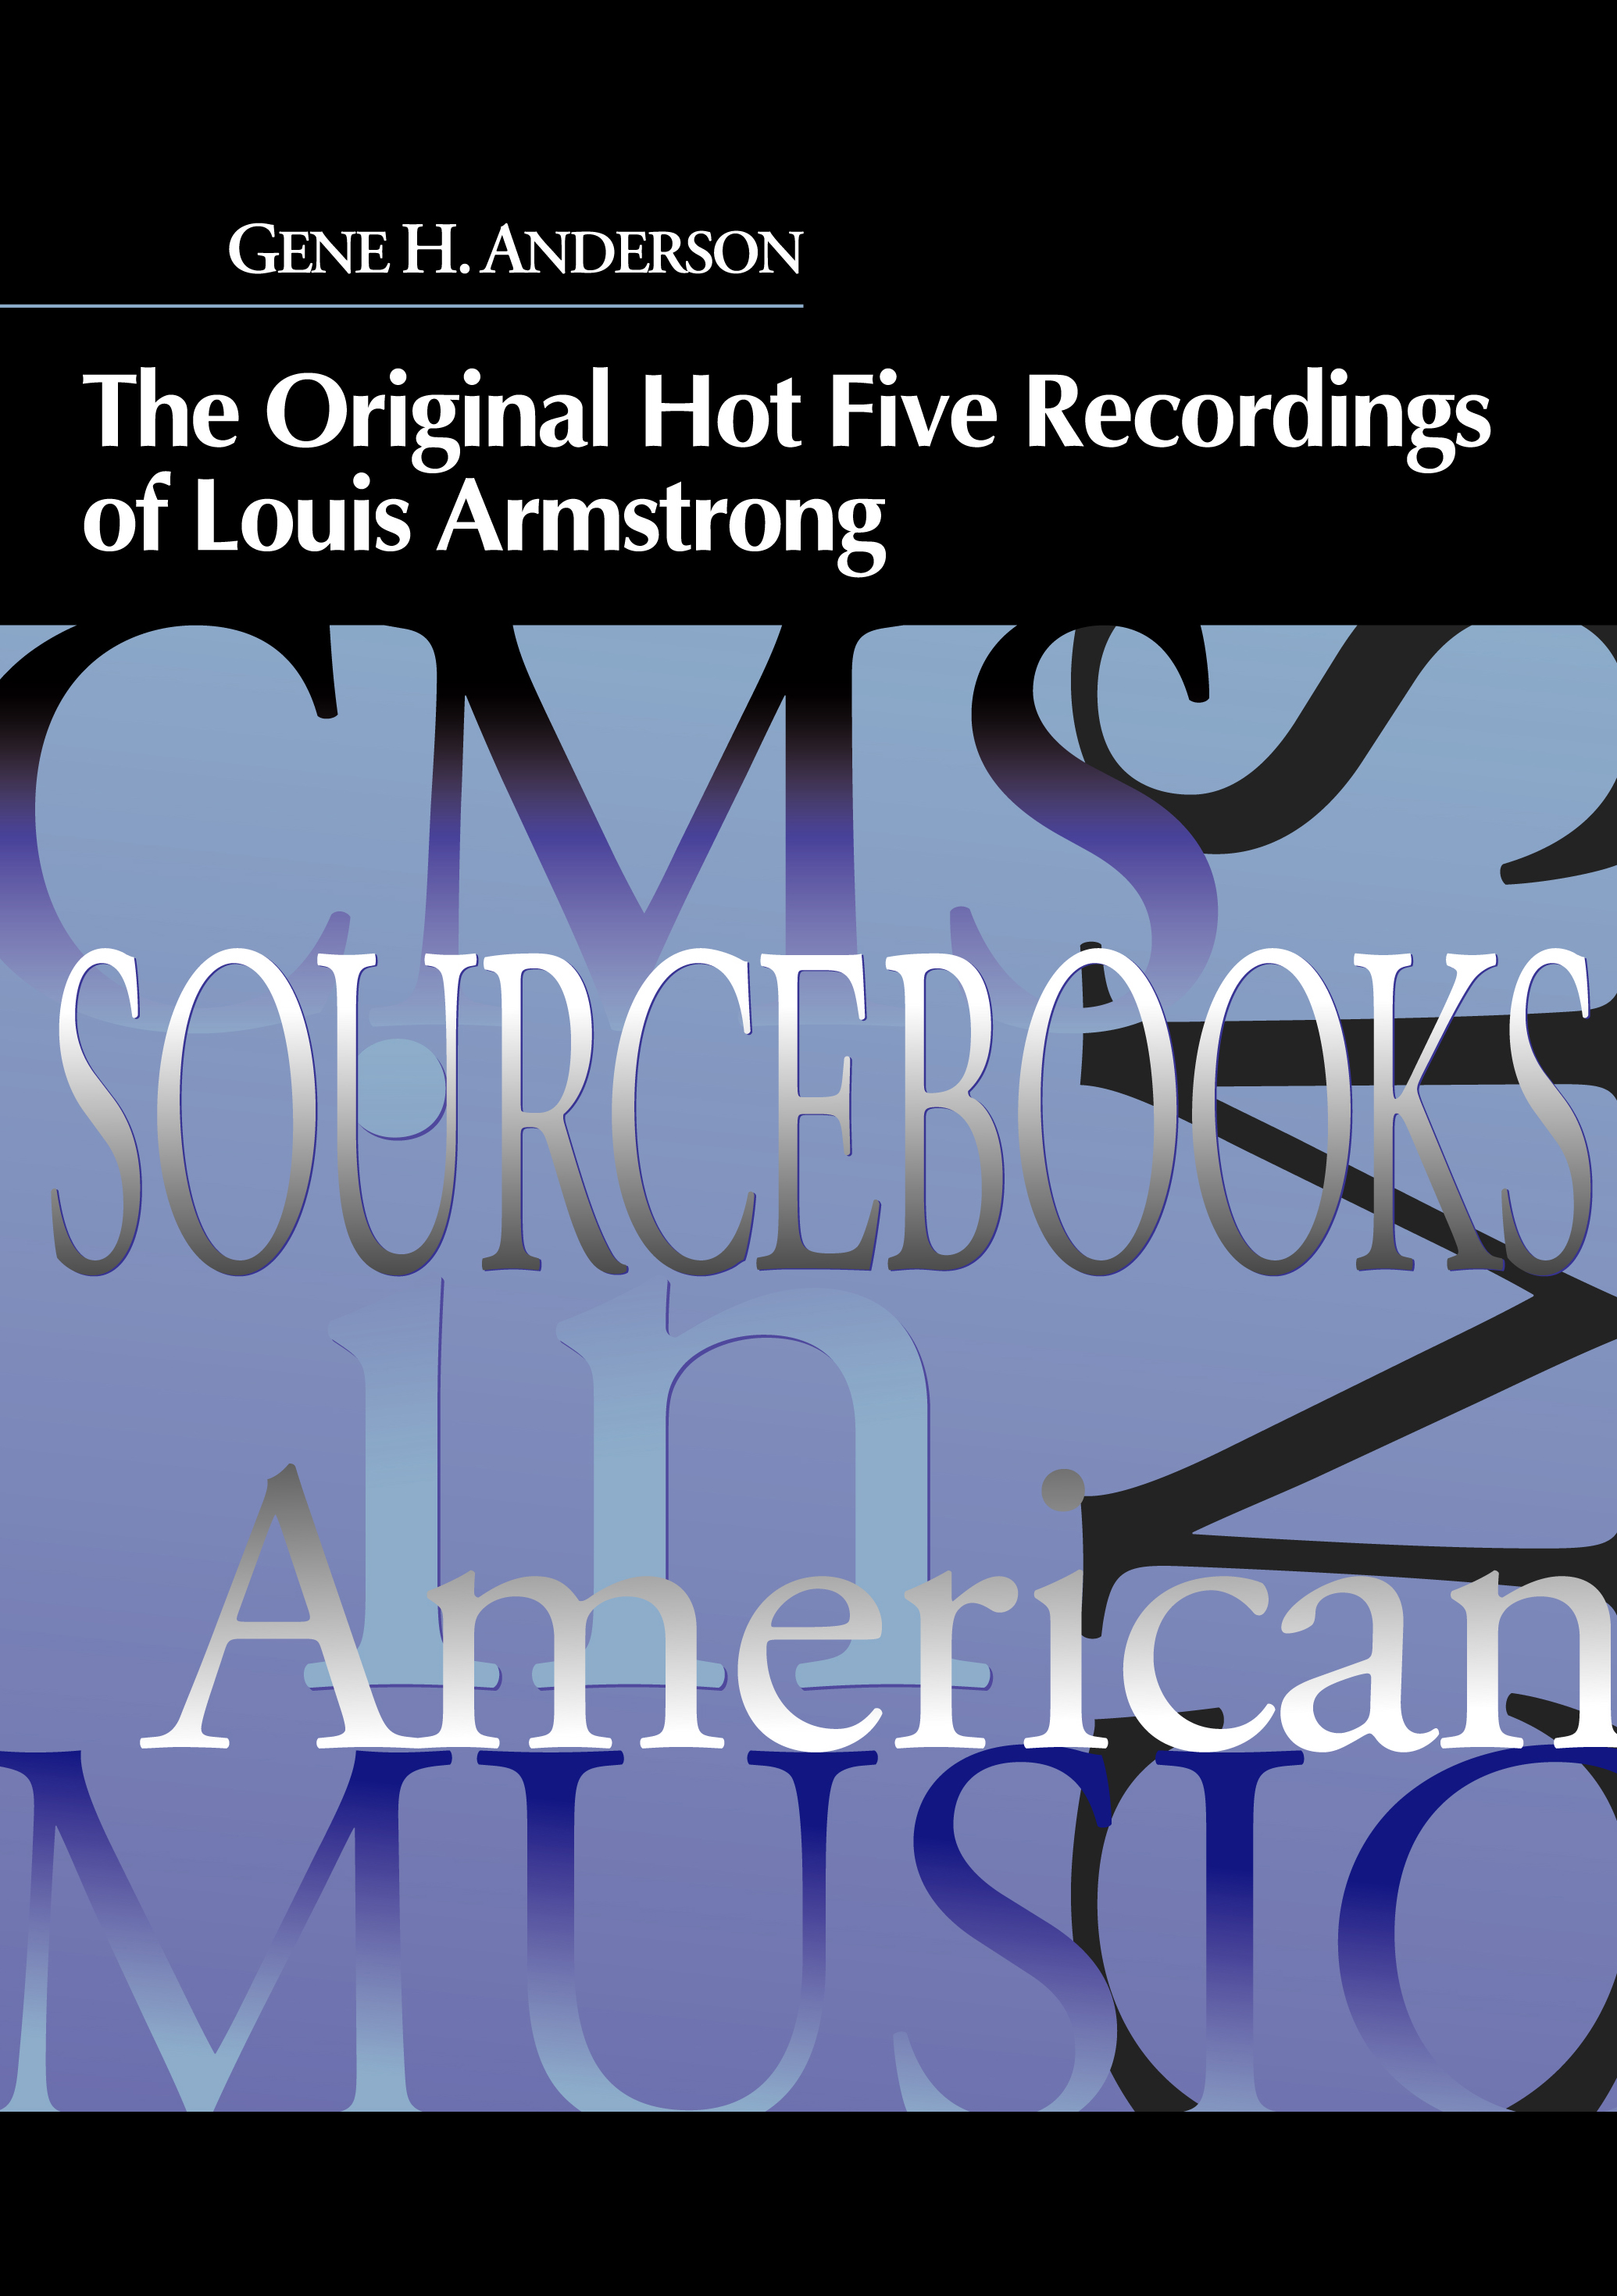 The Original Hot Five Recordings of Louis Armstrong